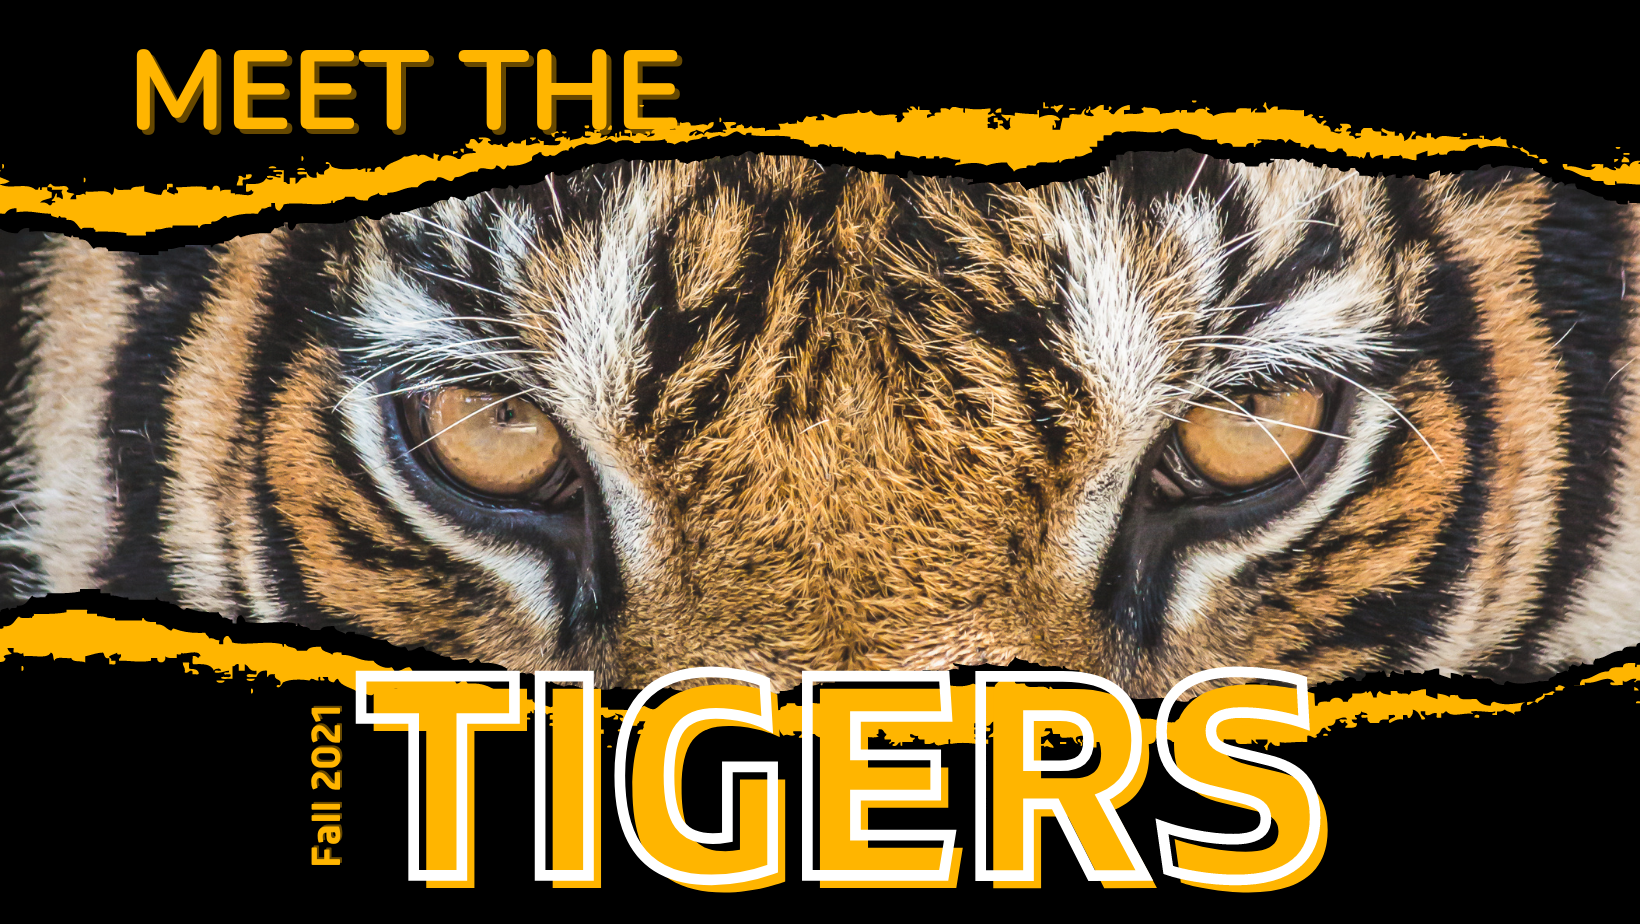 Meet the tigers graphic